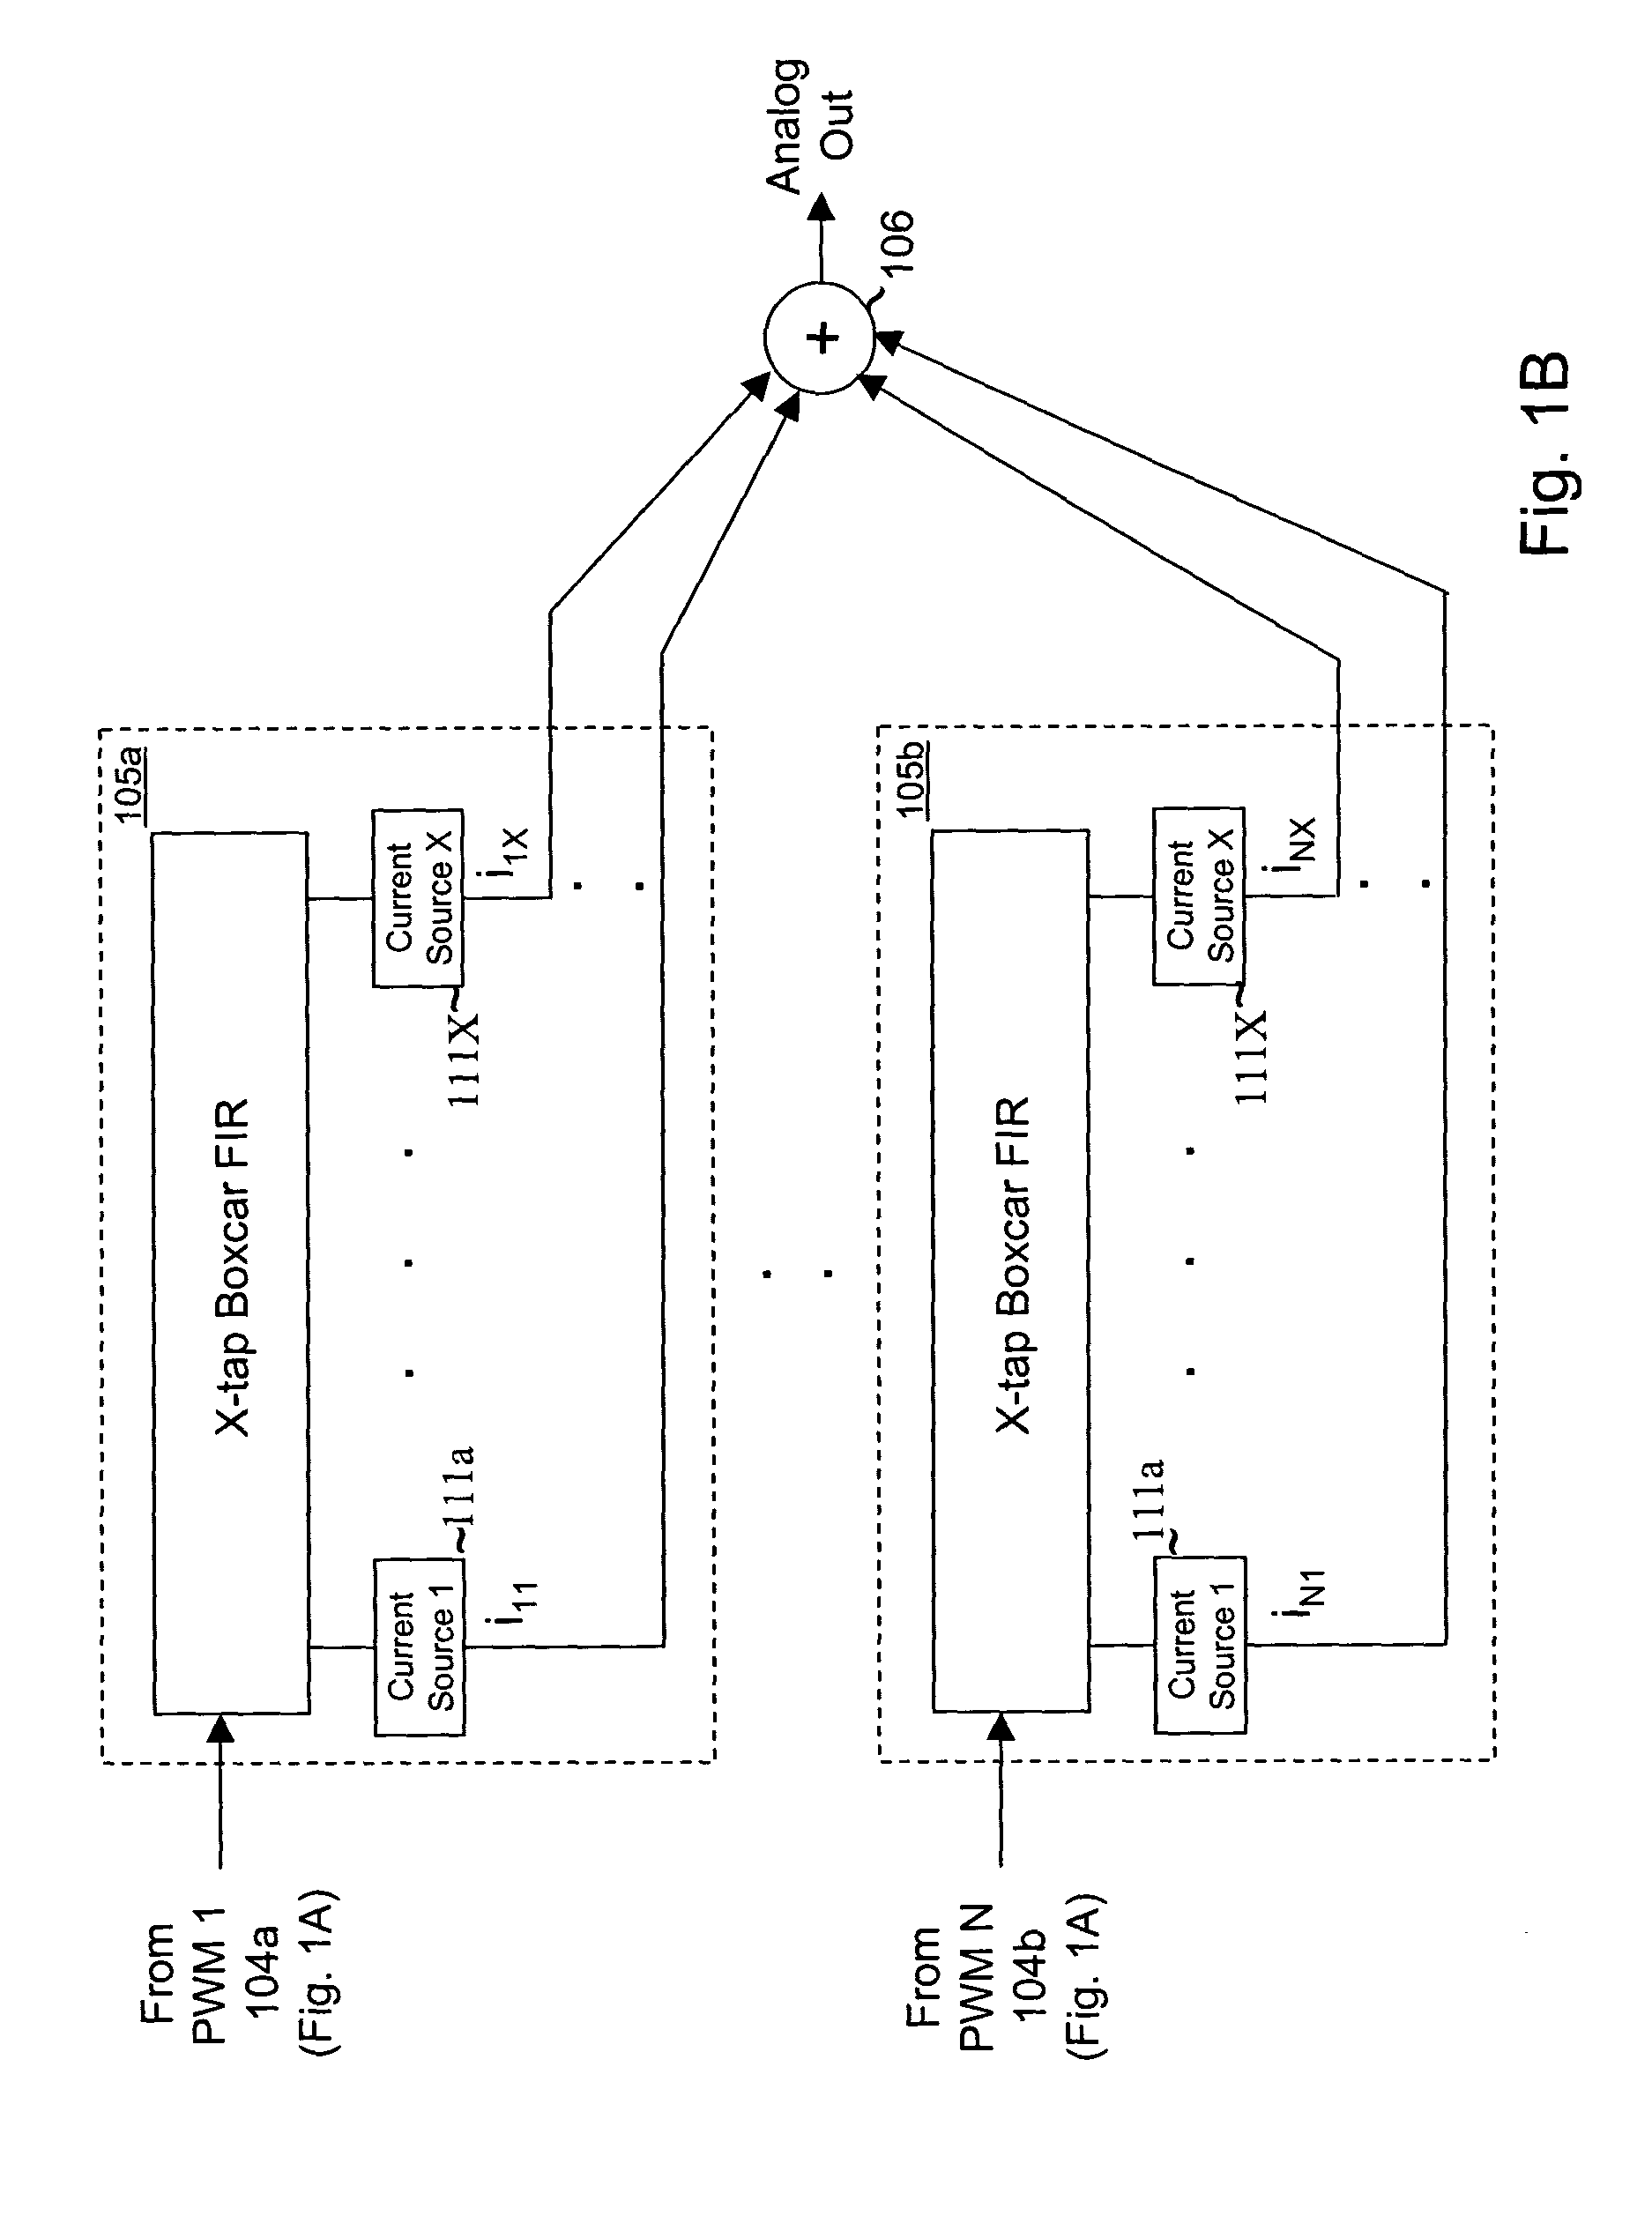 Data converters with ternary pulse width modulation output stages and methods and systems using the same